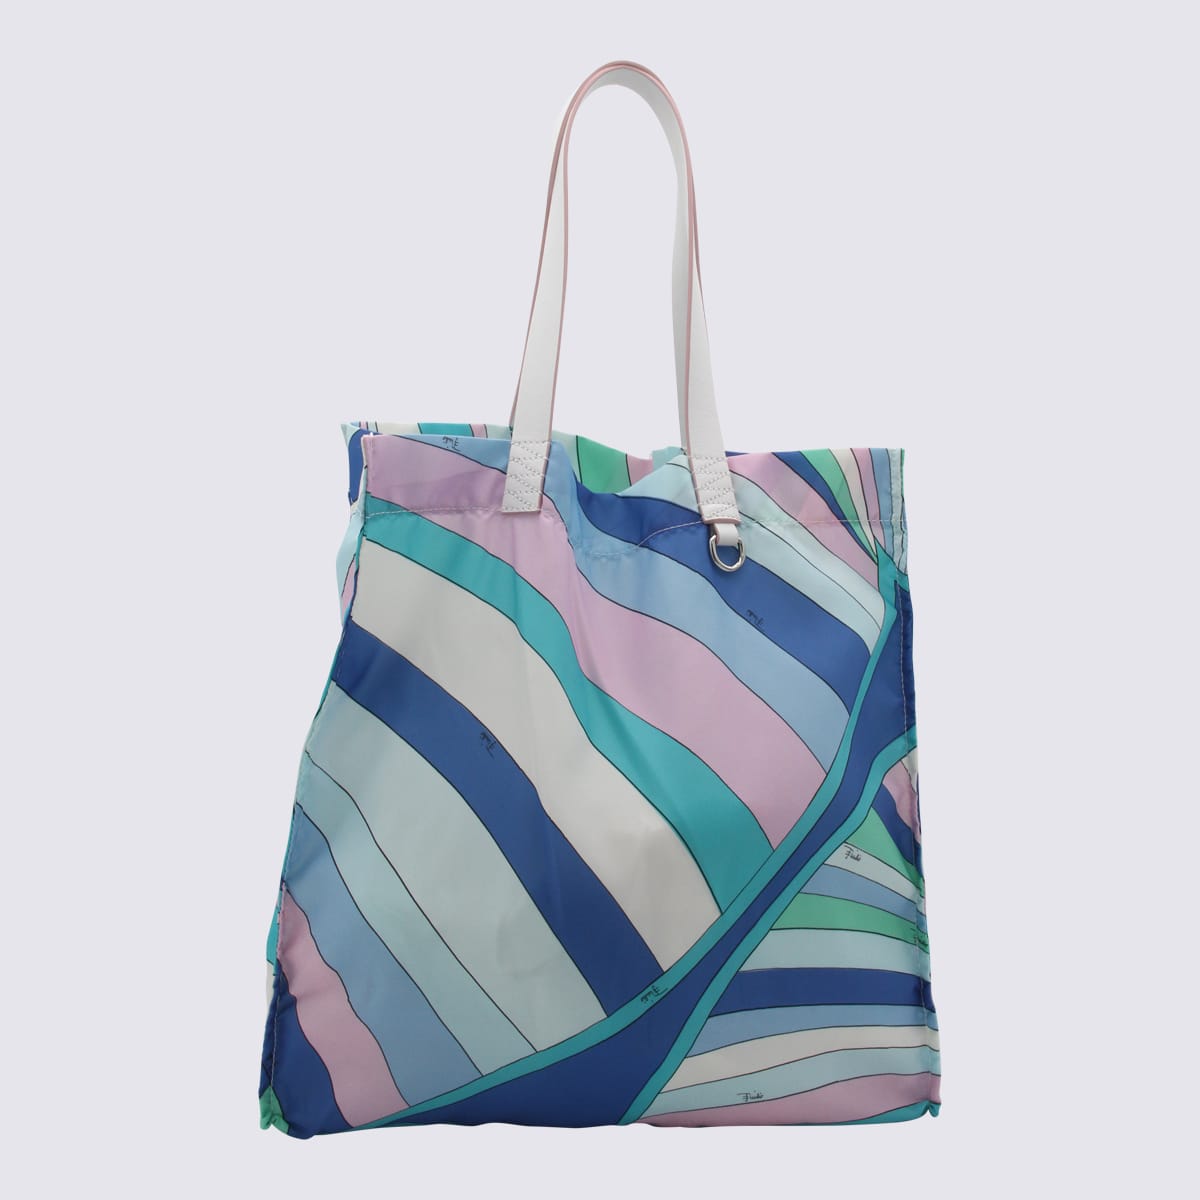 Blue And White Yummy Tote Bag